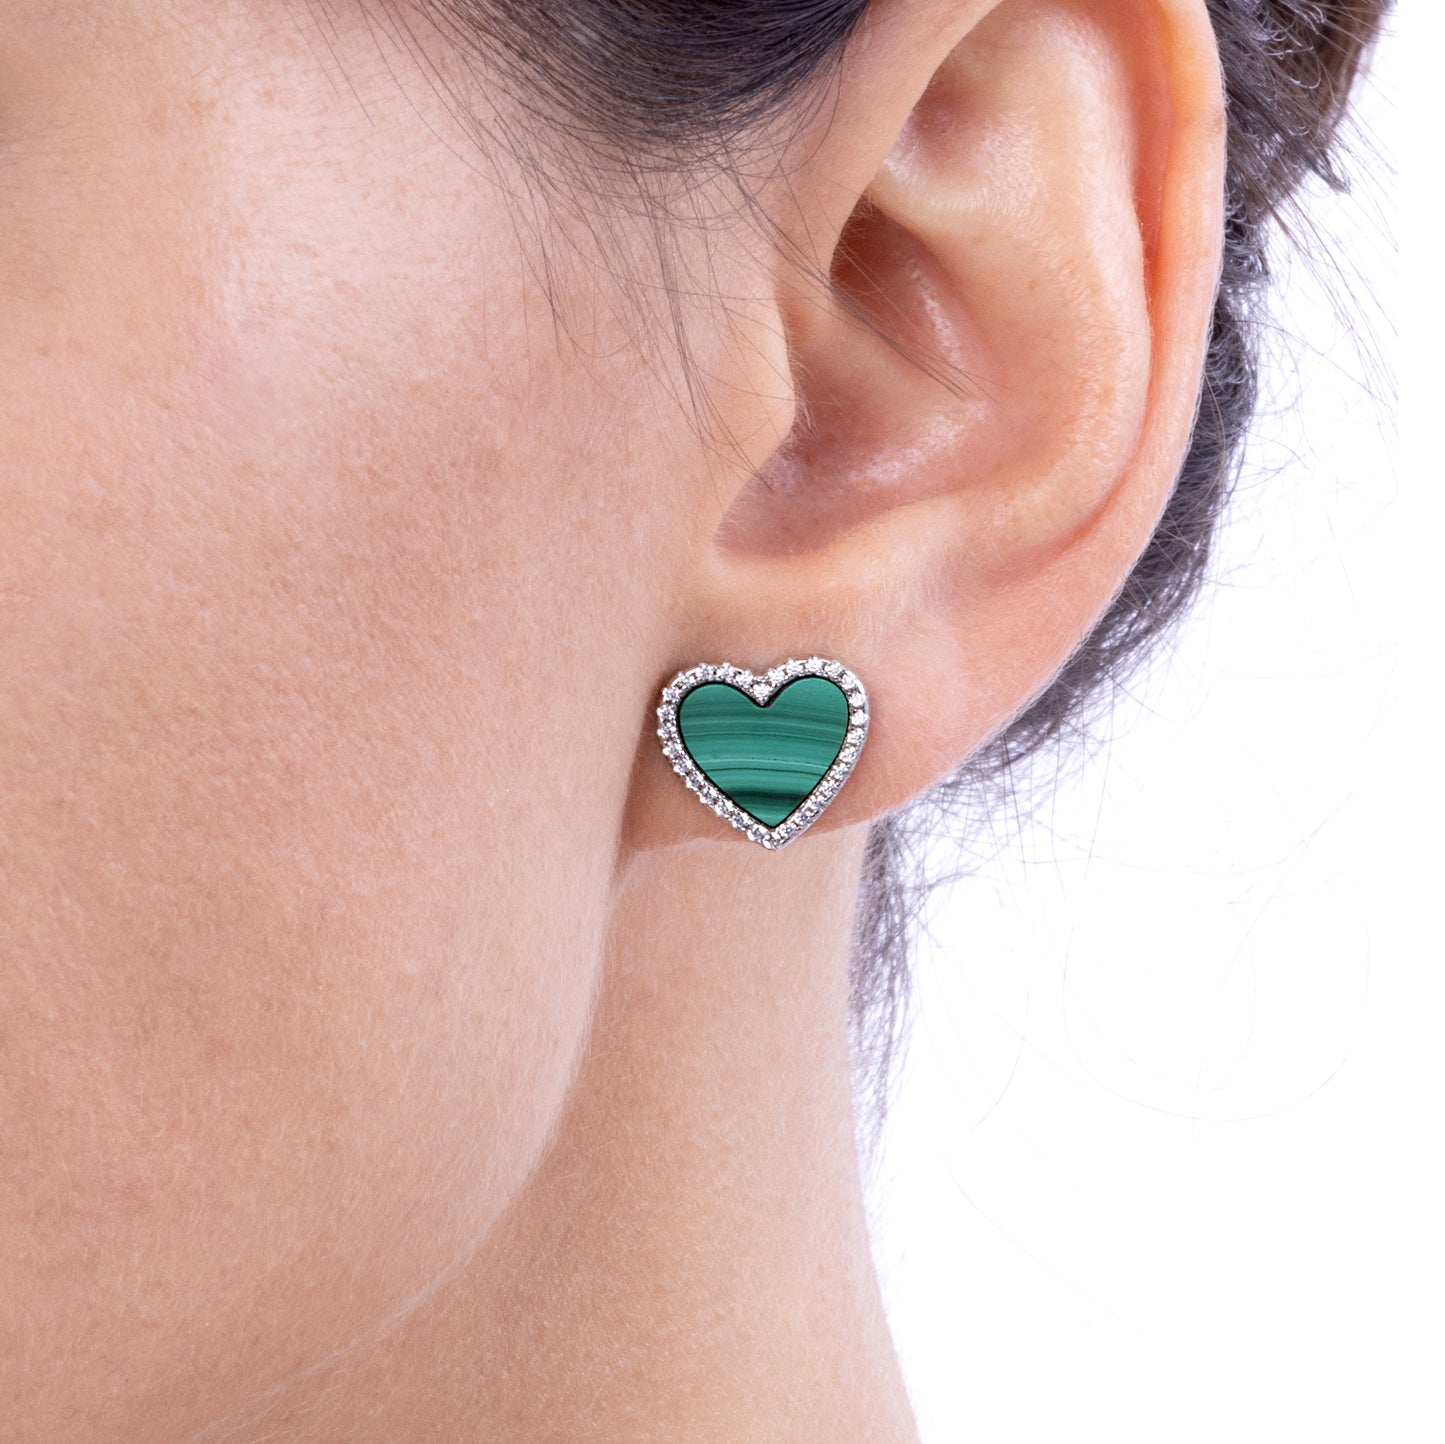 House of Cards 04 Malachite Earrings